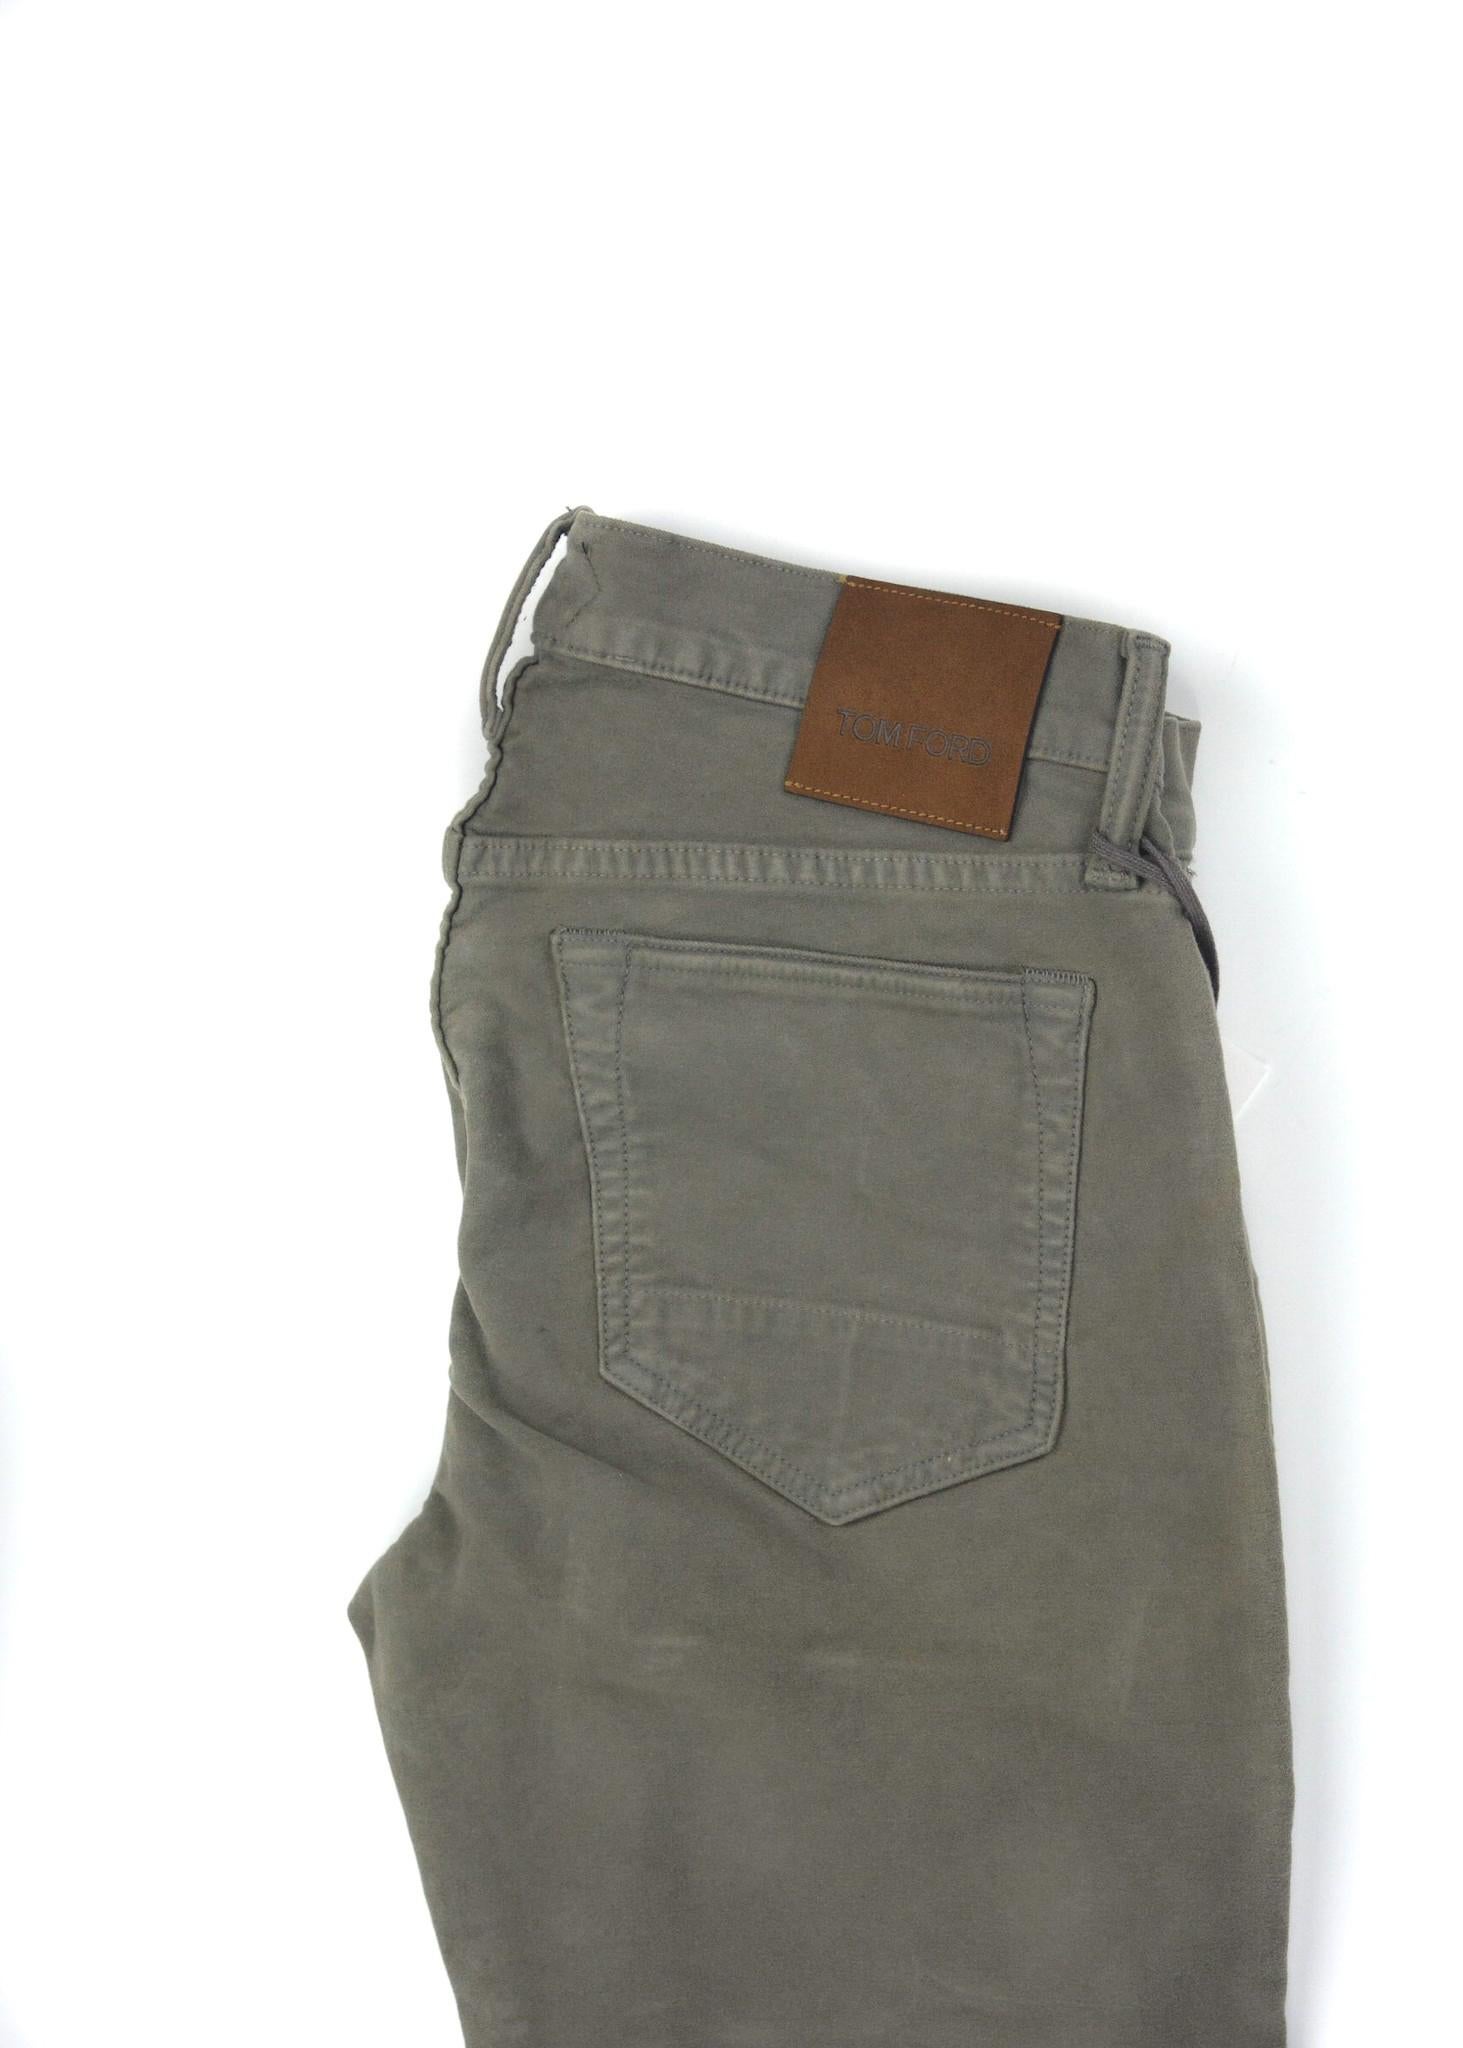 Bask in the appreciation for aesthetics in your light olive Tom Ford Jeans. These pants feature a light olive green color with slight orange tint, smooth cotton texture, and updated slim fit. You can pair these trousers with a slim fit t shirt or